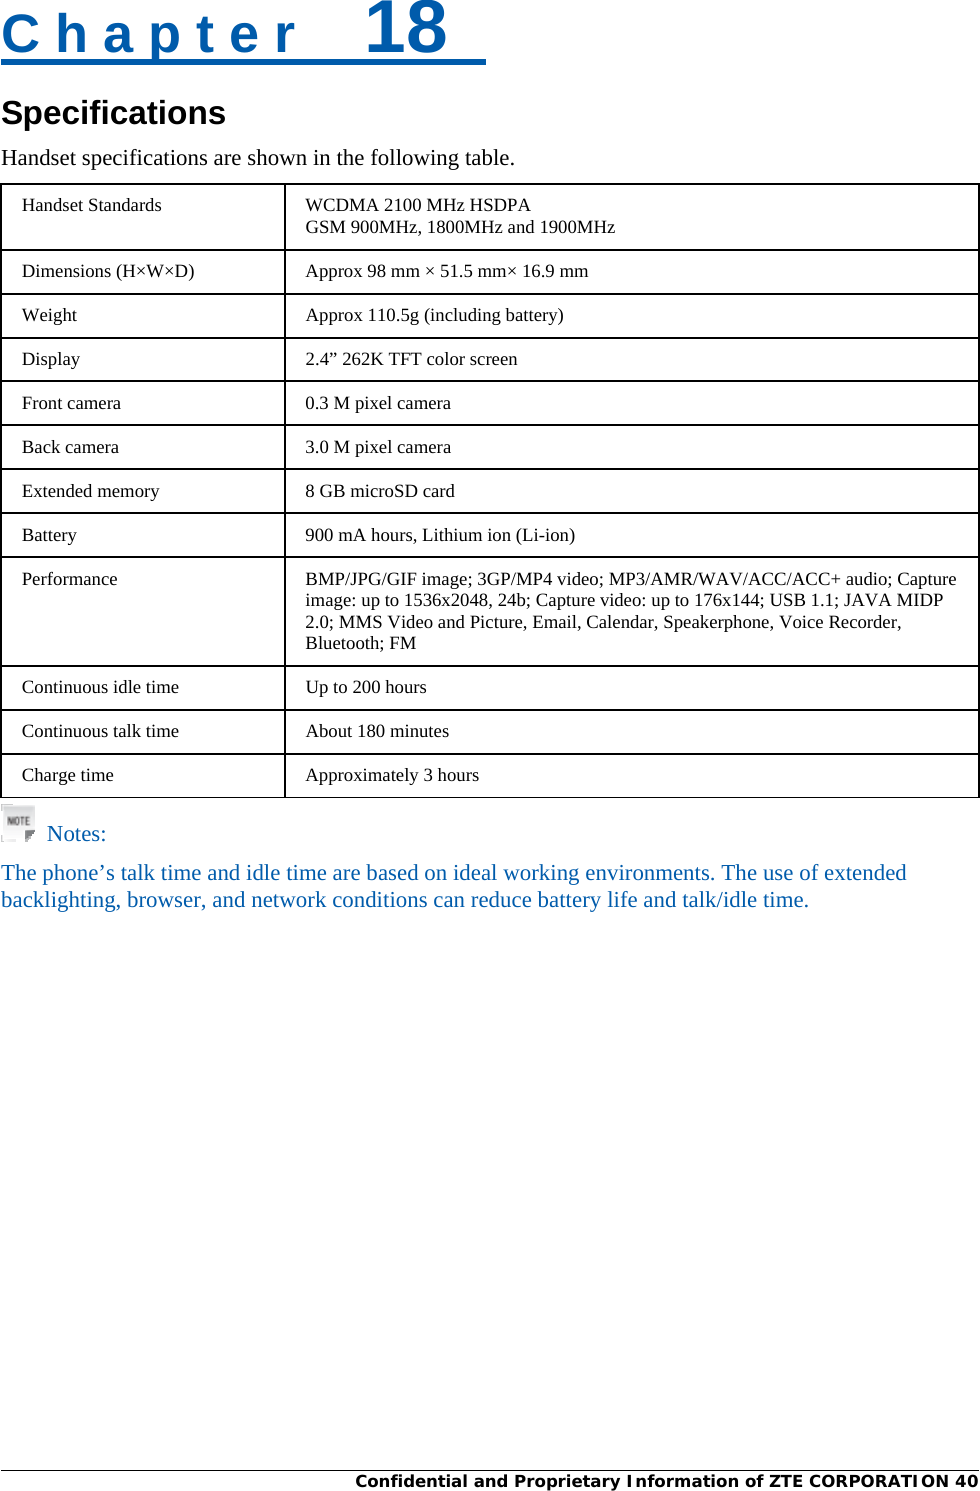 Confidential and Proprietary Information of ZTE CORPORATION 40C h a p t e r    18   Specifications Handset specifications are shown in the following table. Handset Standards  WCDMA 2100 MHz HSDPA GSM 900MHz, 1800MHz and 1900MHz Dimensions (H×W×D)  Approx 98 mm × 51.5 mm× 16.9 mm Weight  Approx 110.5g (including battery) Display  2.4” 262K TFT color screen Front camera  0.3 M pixel camera Back camera  3.0 M pixel camera Extended memory  8 GB microSD card Battery  900 mA hours, Lithium ion (Li-ion) Performance  BMP/JPG/GIF image; 3GP/MP4 video; MP3/AMR/WAV/ACC/ACC+ audio; Capture image: up to 1536x2048, 24b; Capture video: up to 176x144; USB 1.1; JAVA MIDP 2.0; MMS Video and Picture, Email, Calendar, Speakerphone, Voice Recorder, Bluetooth; FM Continuous idle time  Up to 200 hours Continuous talk time  About 180 minutes Charge time  Approximately 3 hours   Notes: The phone’s talk time and idle time are based on ideal working environments. The use of extended backlighting, browser, and network conditions can reduce battery life and talk/idle time. 